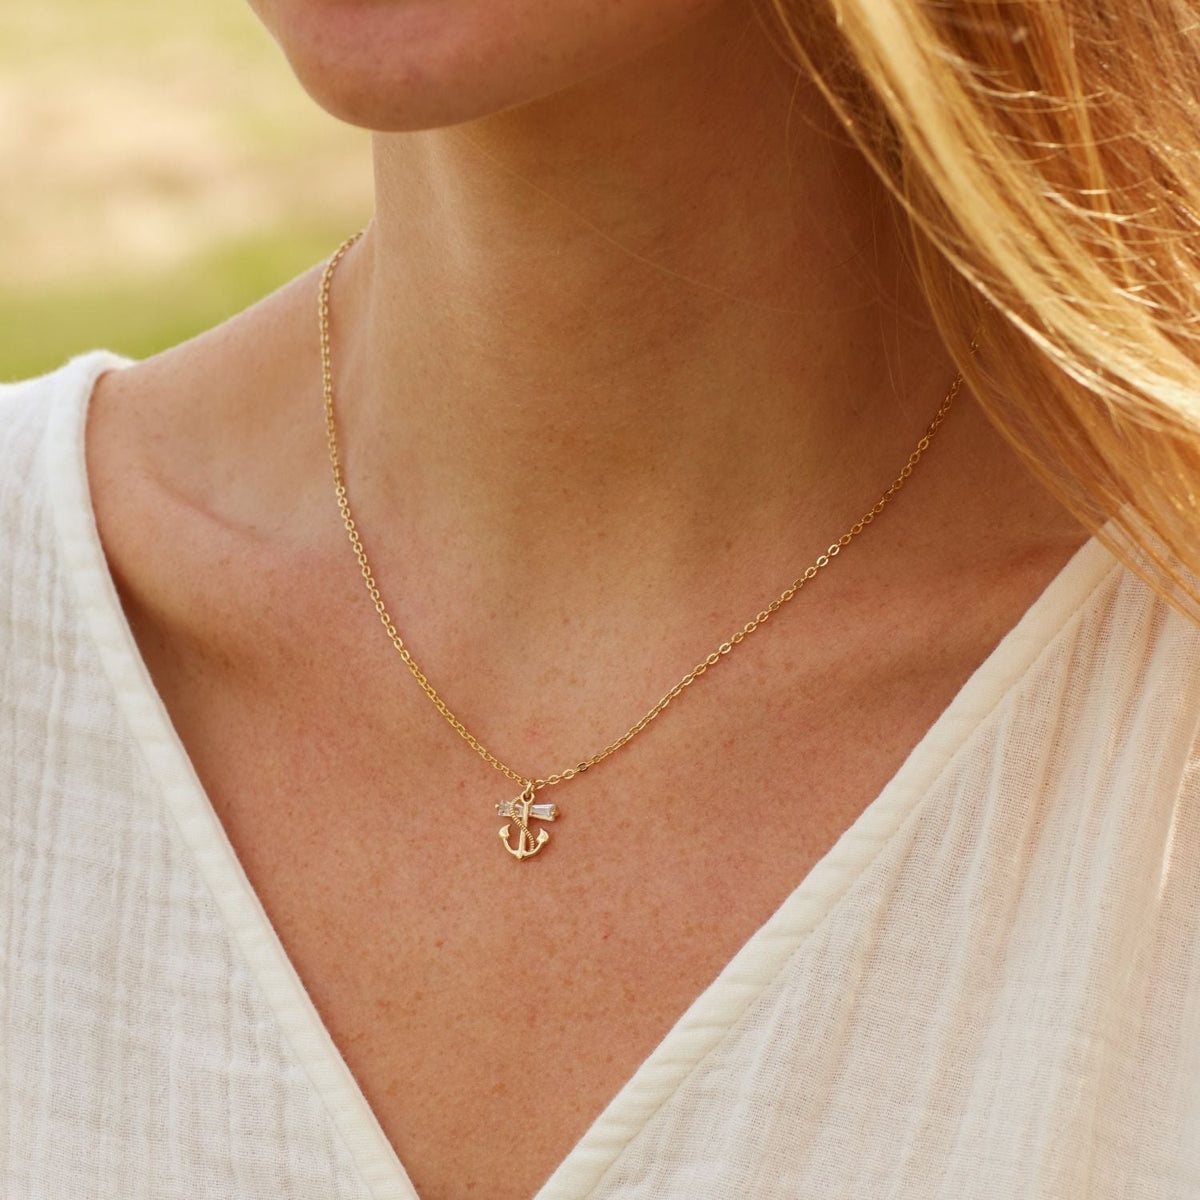 In Memory of your Beautiful Mother | Everlasting Love | Anchor Necklace